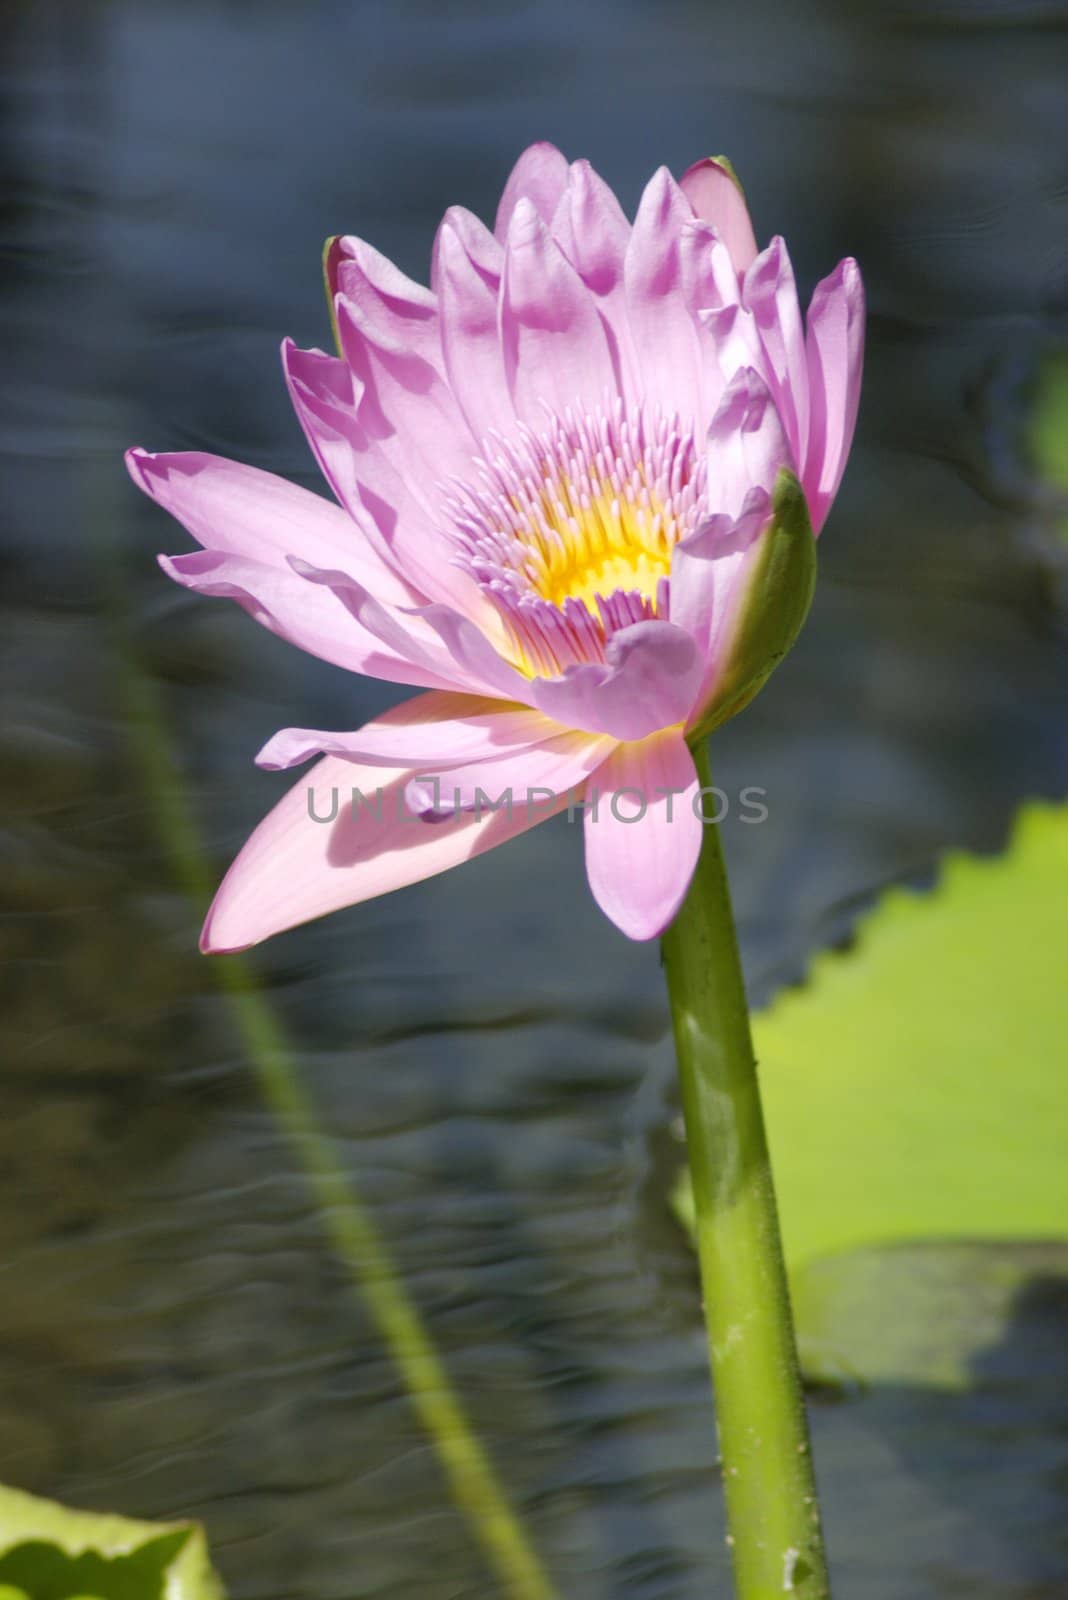 A pink flower of the water lily, an aquatic plant of the Nymphaea family